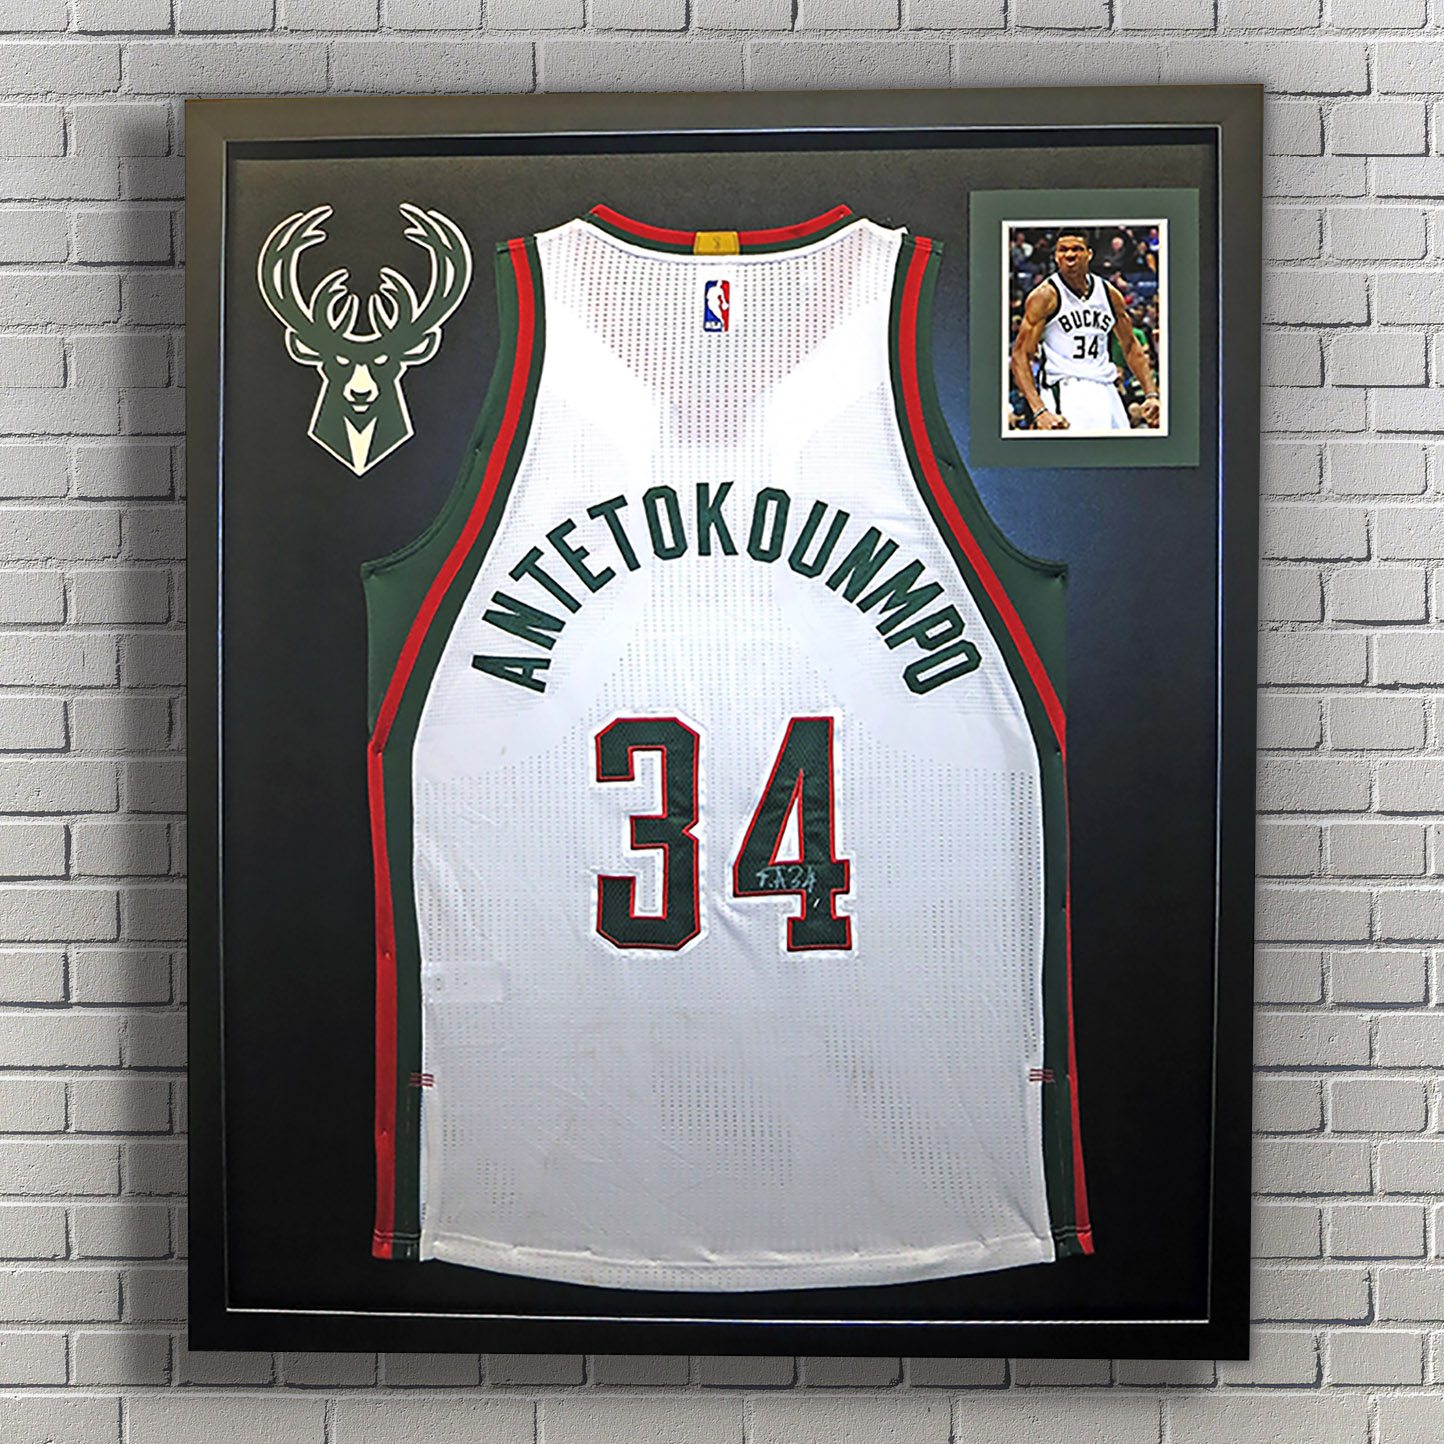 Basketball Jersey Custom Frame - The Great Frame Up :: Whitefish Bay